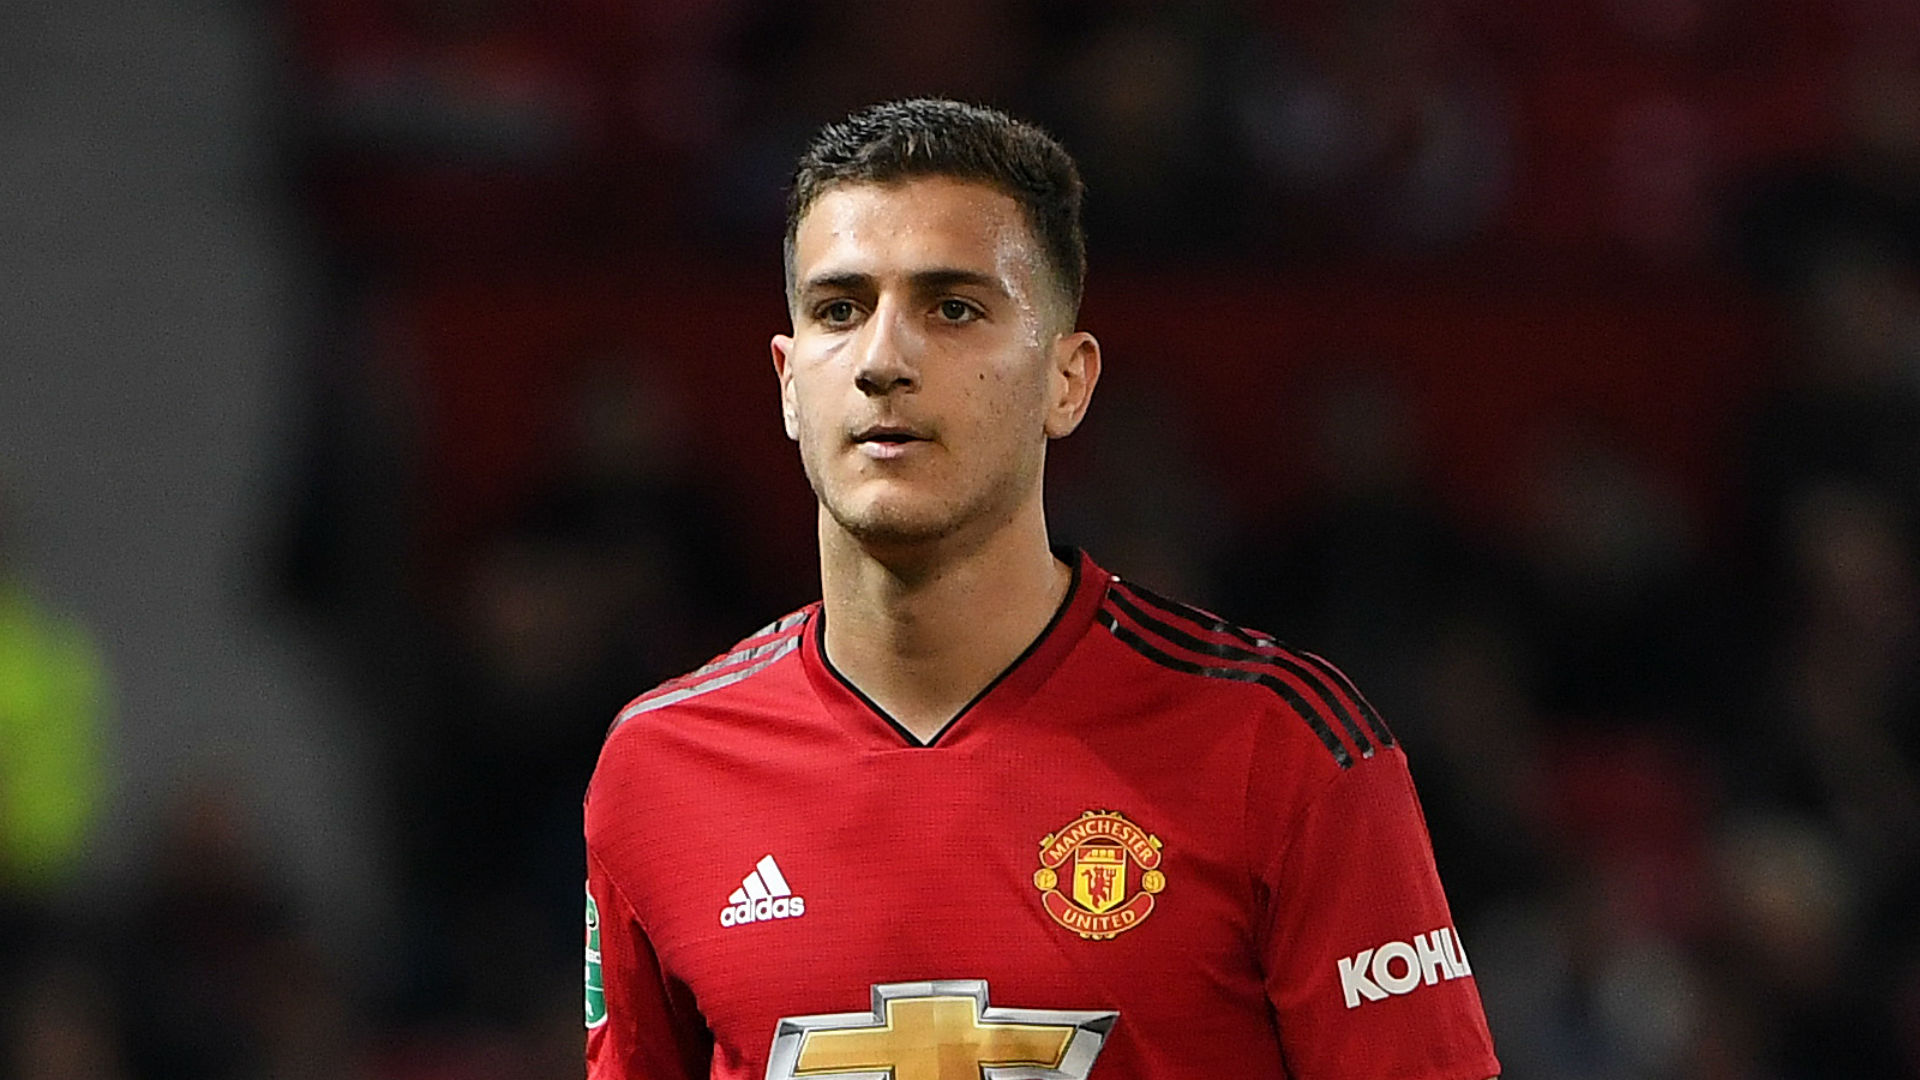 Diogo Dalot age, position, salary, Net Worth, girlfriend, facts, football Career